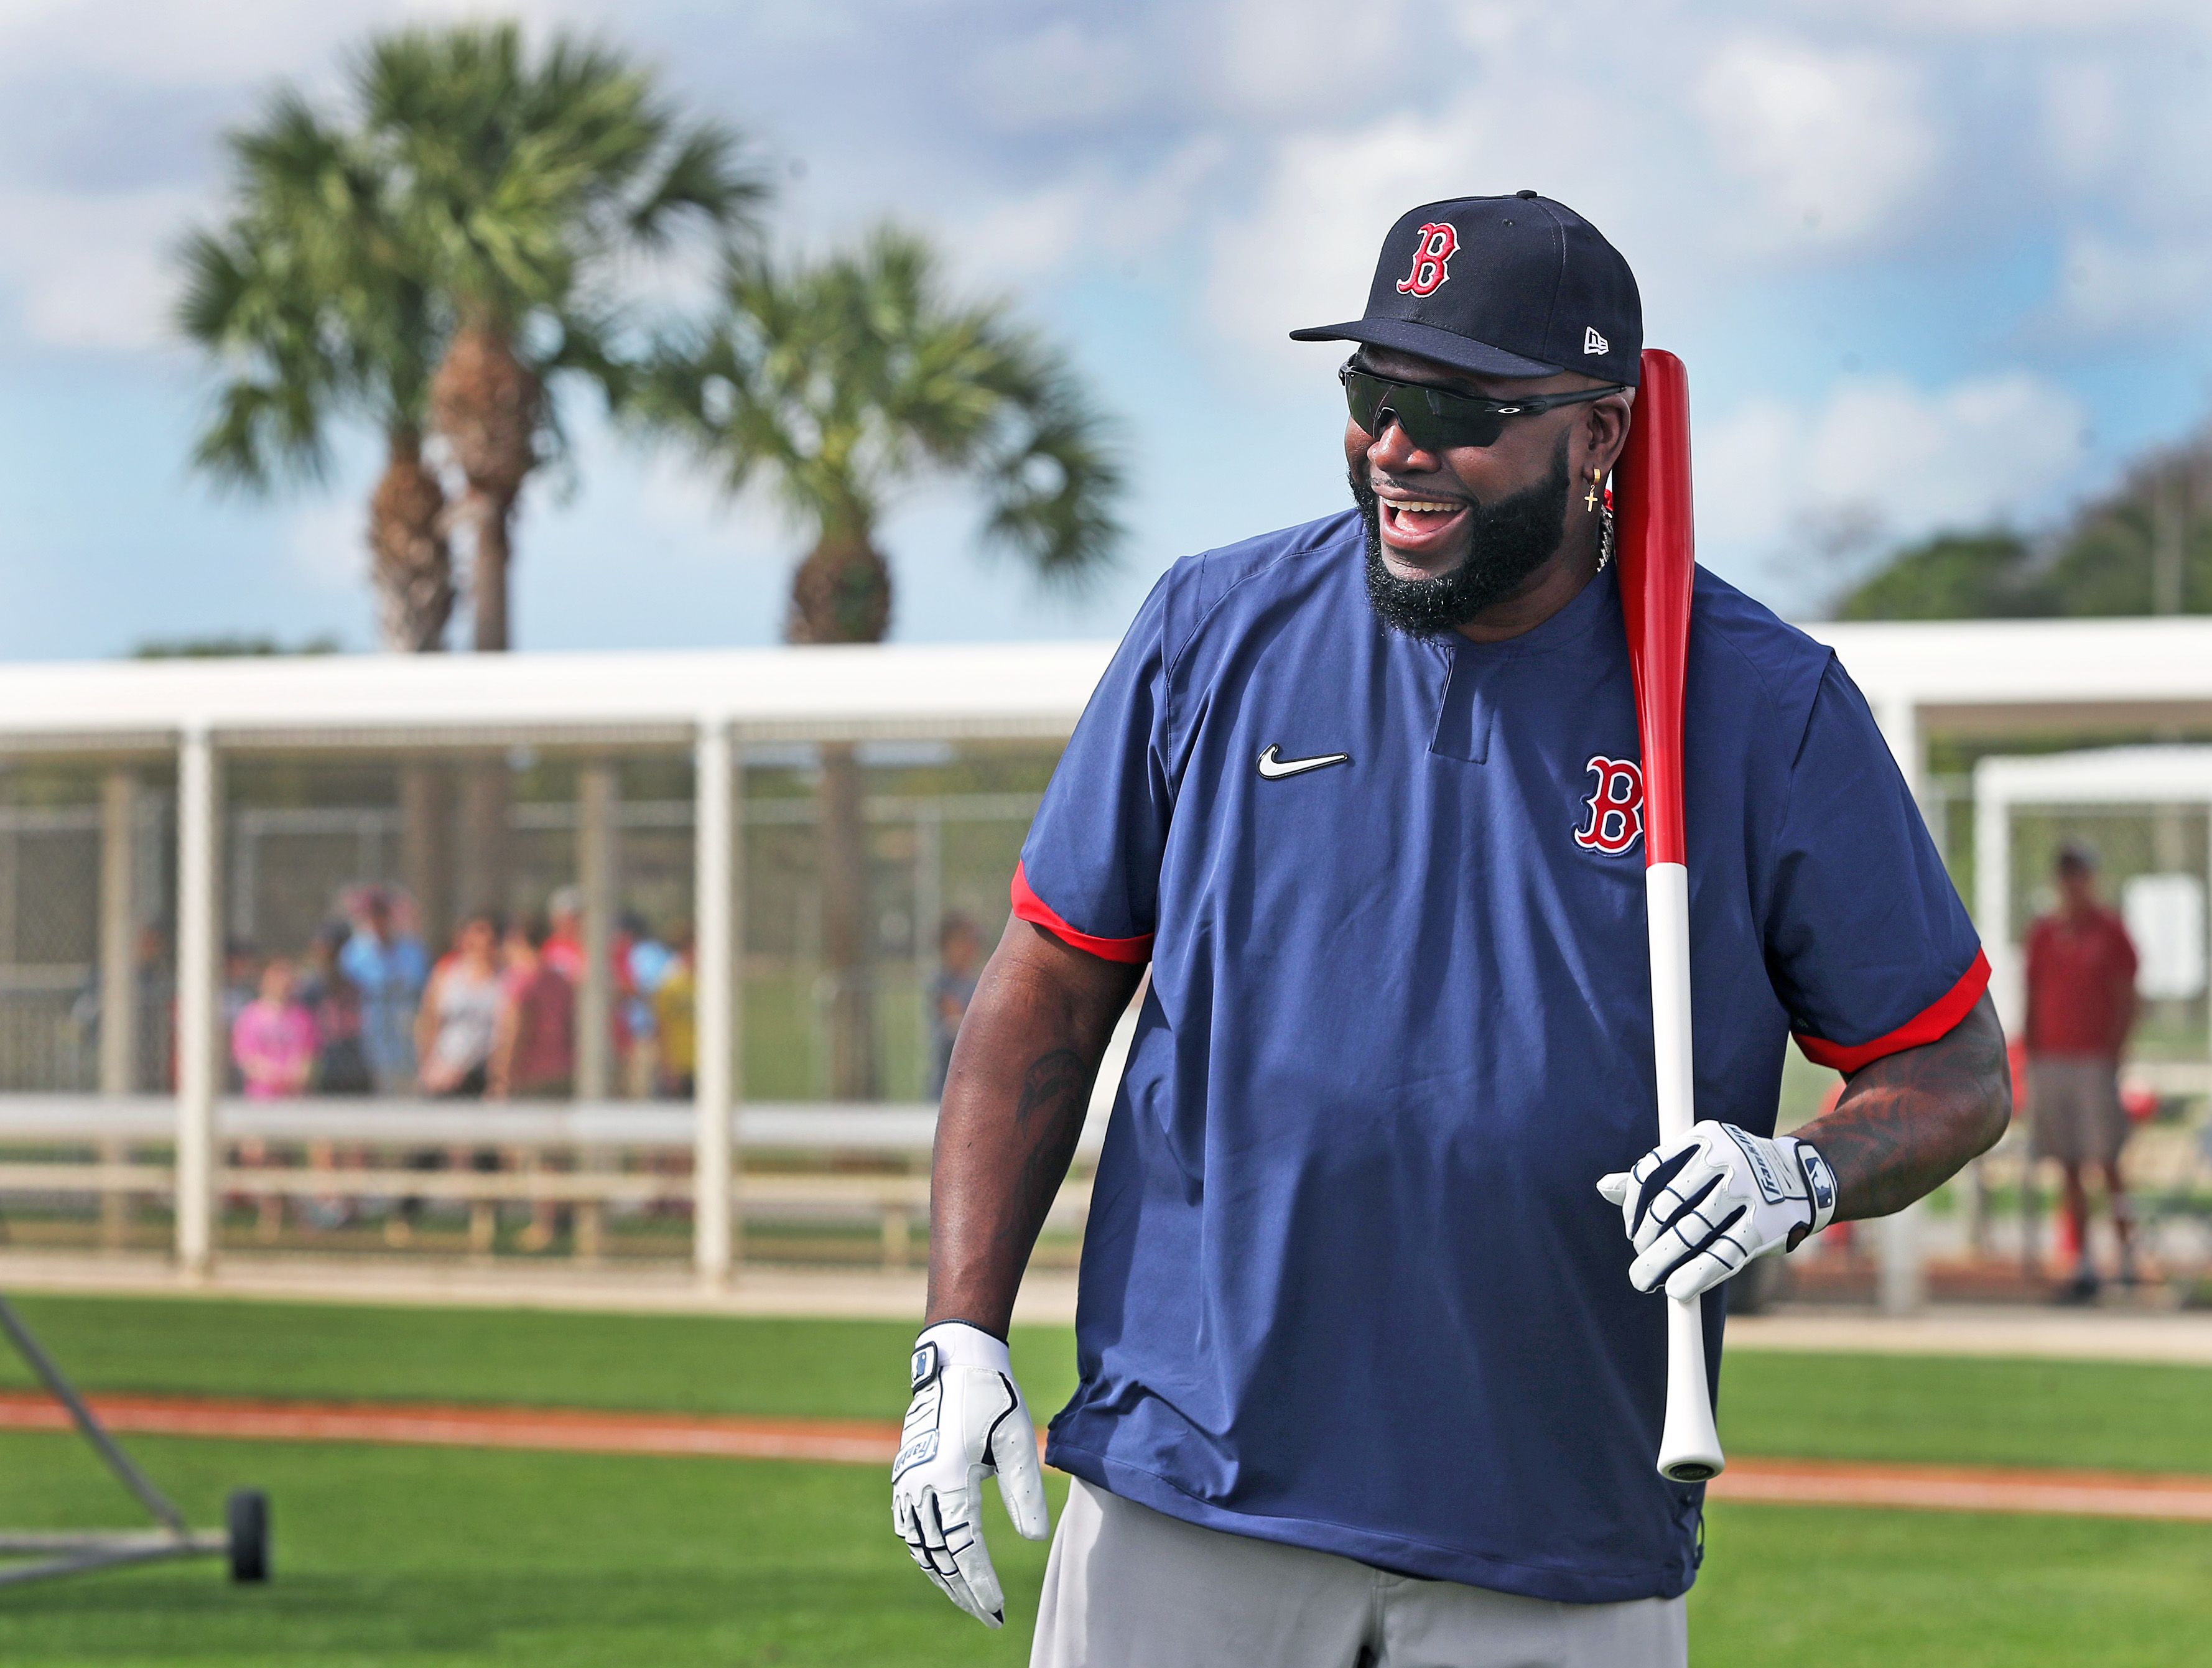 Photo of the Day: David Ortiz in a Patriots jersey - NBC Sports